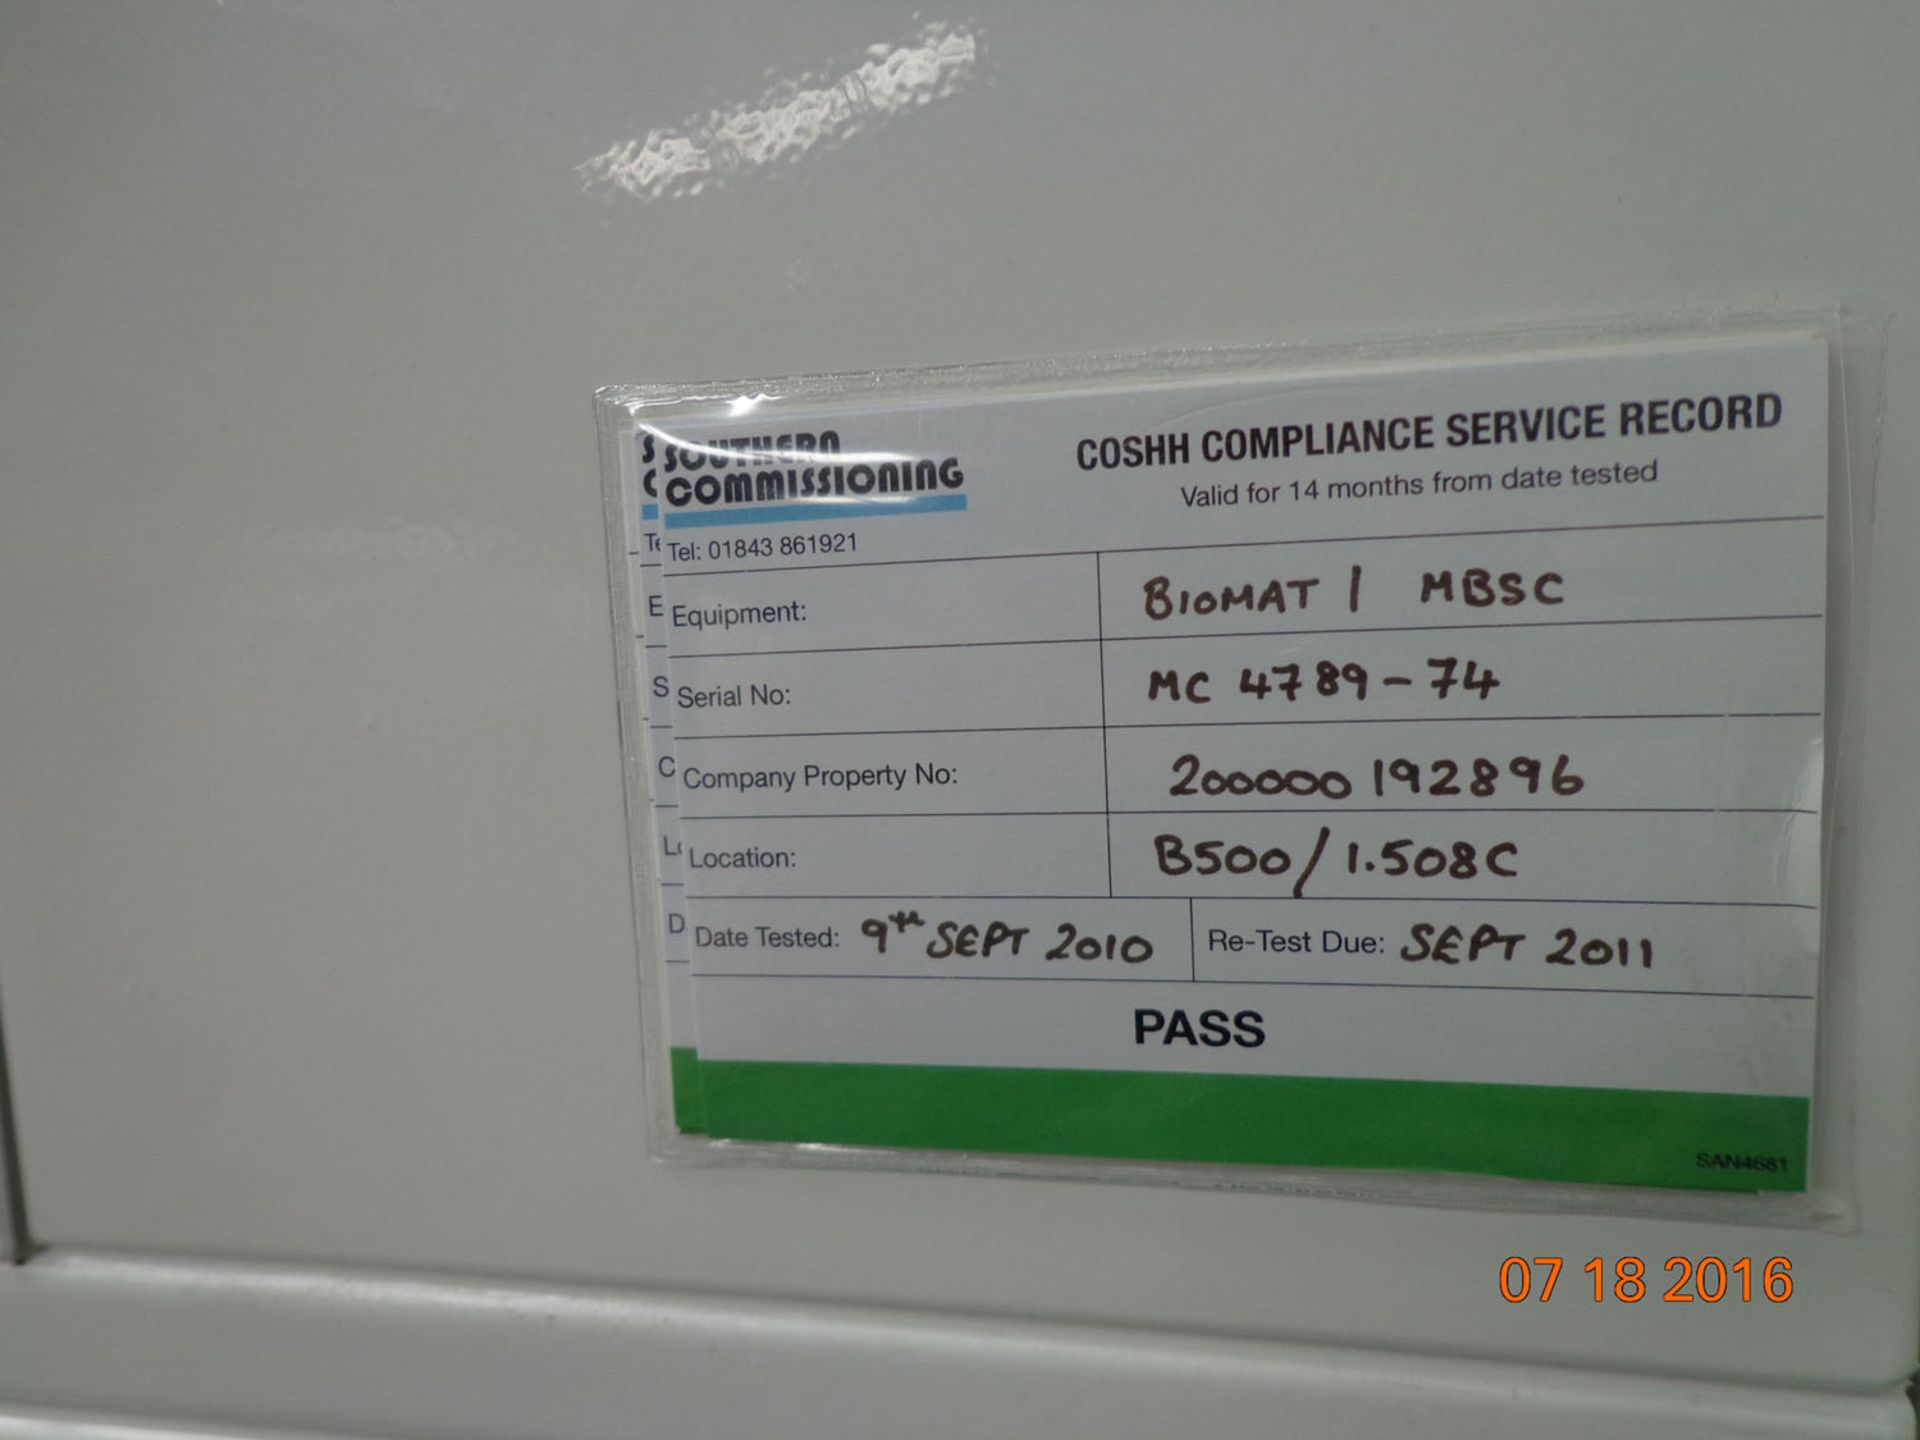 BioMAT Class 1 Microbiological safety cabinet, serial number MC 4789-74 (Ref: WA11138) - Image 5 of 8